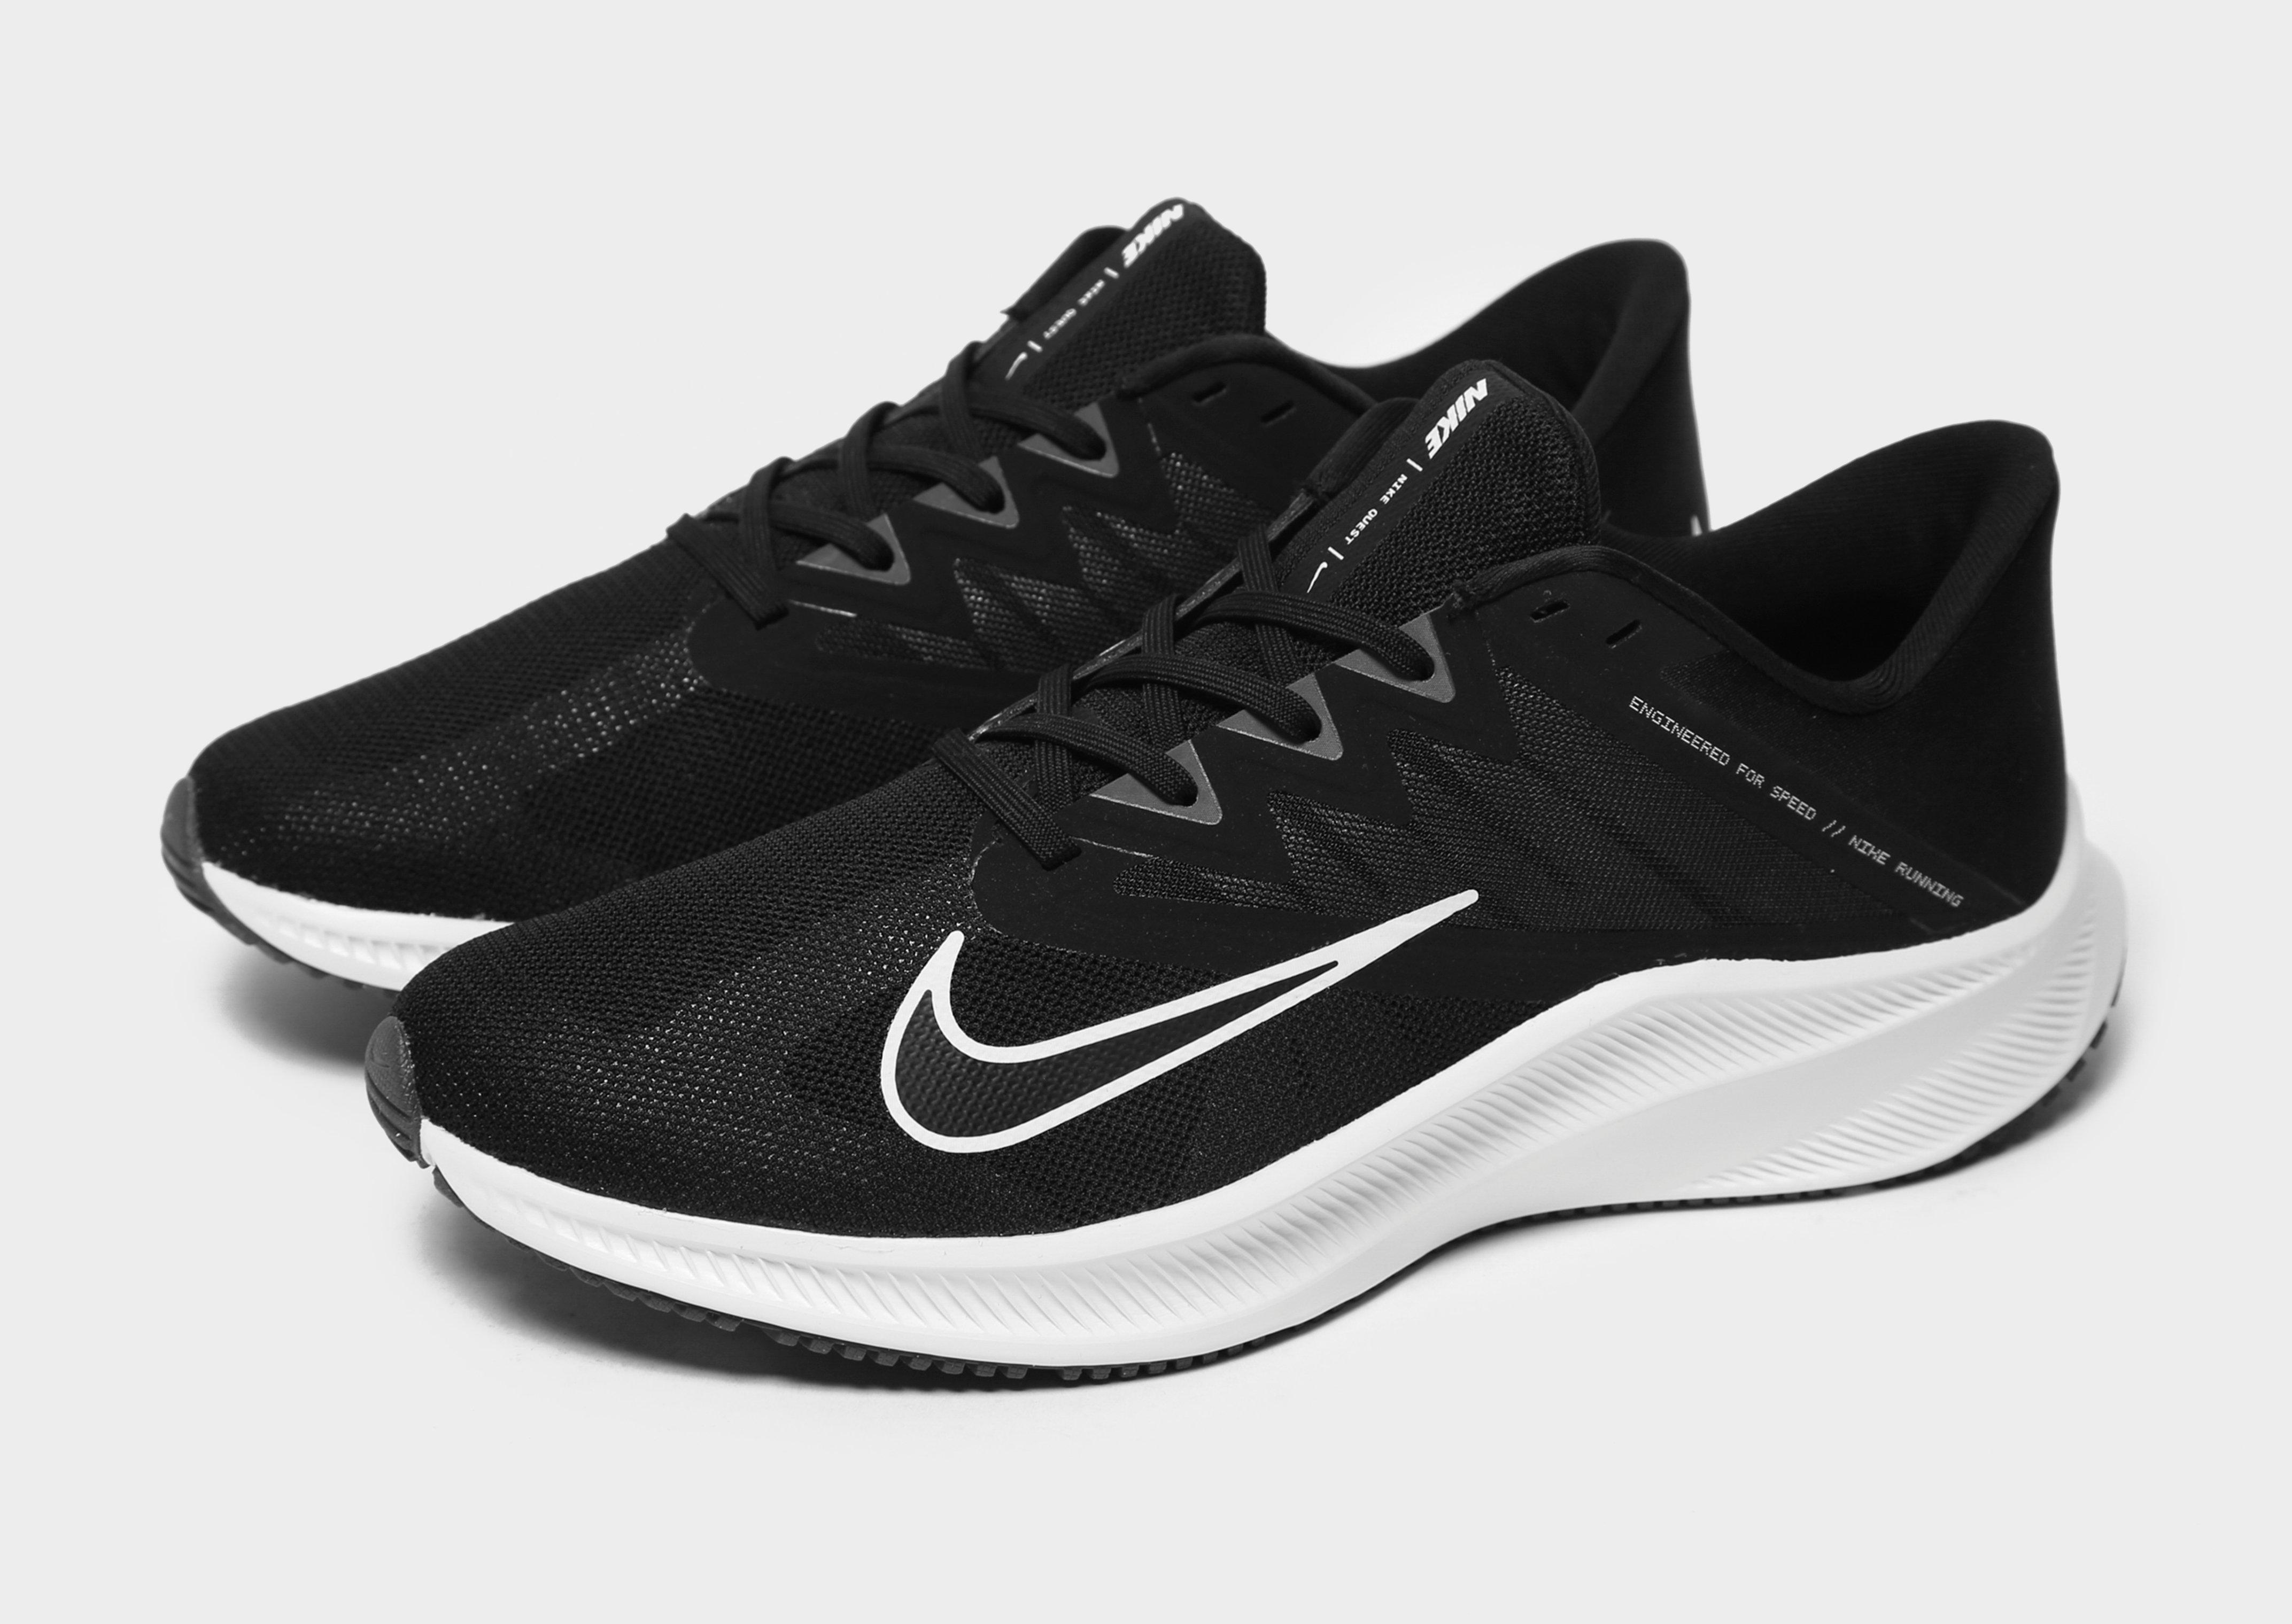 nike quest hombre opiniones